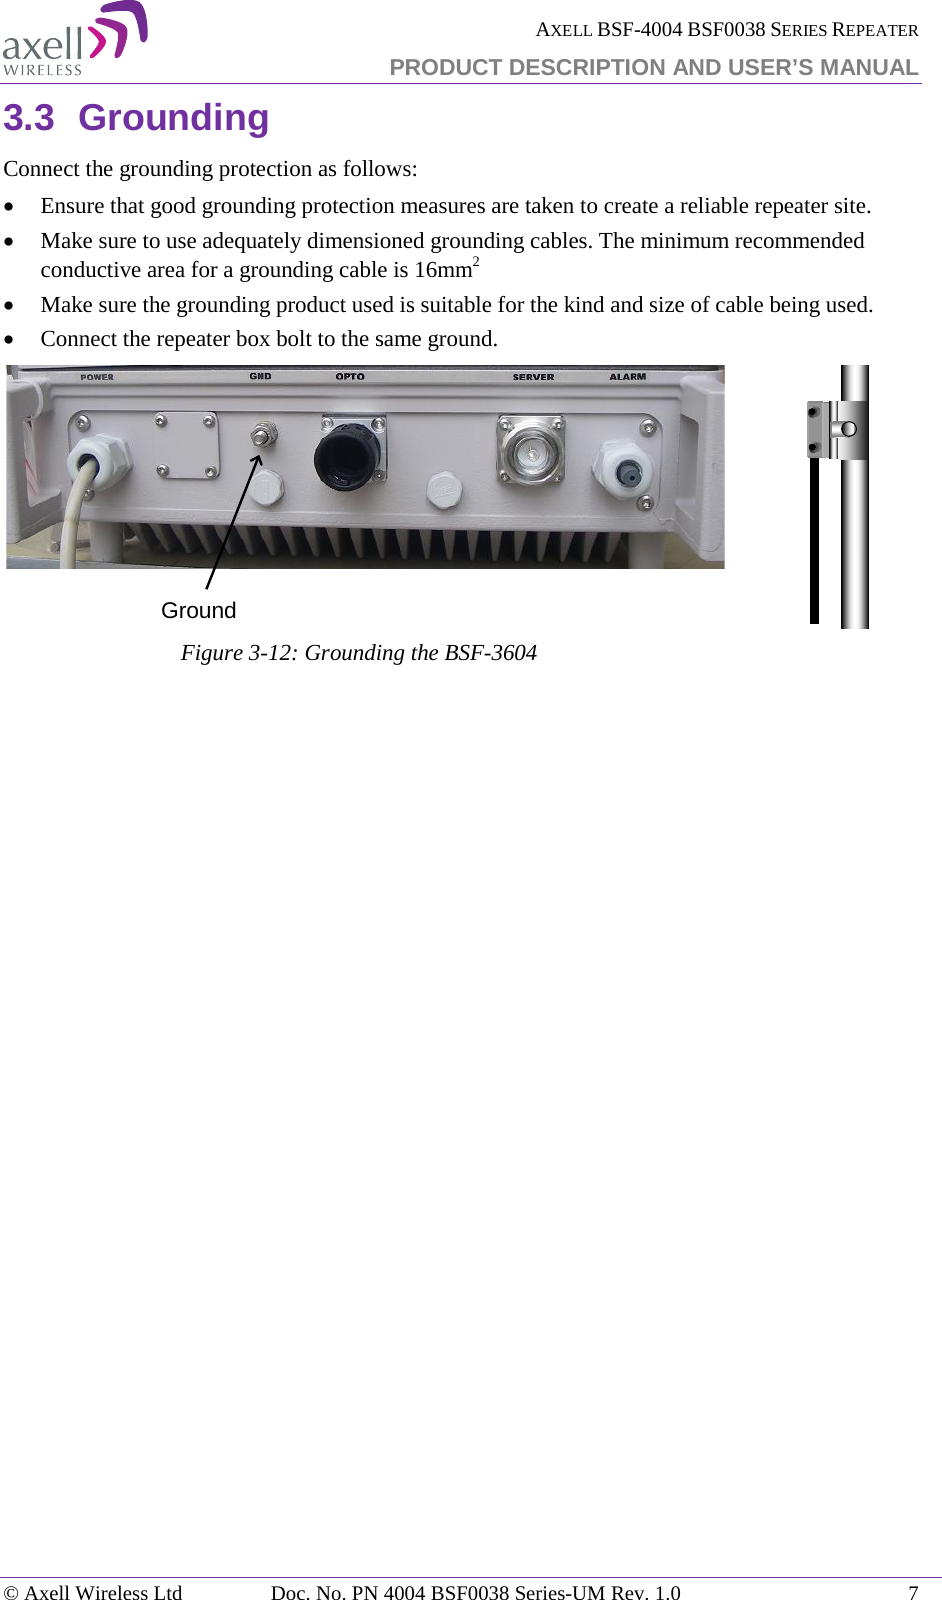  AXELL BSF-4004 BSF0038 SERIES REPEATER PRODUCT DESCRIPTION AND USER’S MANUAL  3.3 Grounding Connect the grounding protection as follows: • Ensure that good grounding protection measures are taken to create a reliable repeater site.  • Make sure to use adequately dimensioned grounding cables. The minimum recommended conductive area for a grounding cable is 16mm2 • Make sure the grounding product used is suitable for the kind and size of cable being used.  • Connect the repeater box bolt to the same ground.  Figure  3-12: Grounding the BSF-3604     Ground© Axell Wireless Ltd Doc. No. PN 4004 BSF0038 Series-UM Rev. 1.0  7 